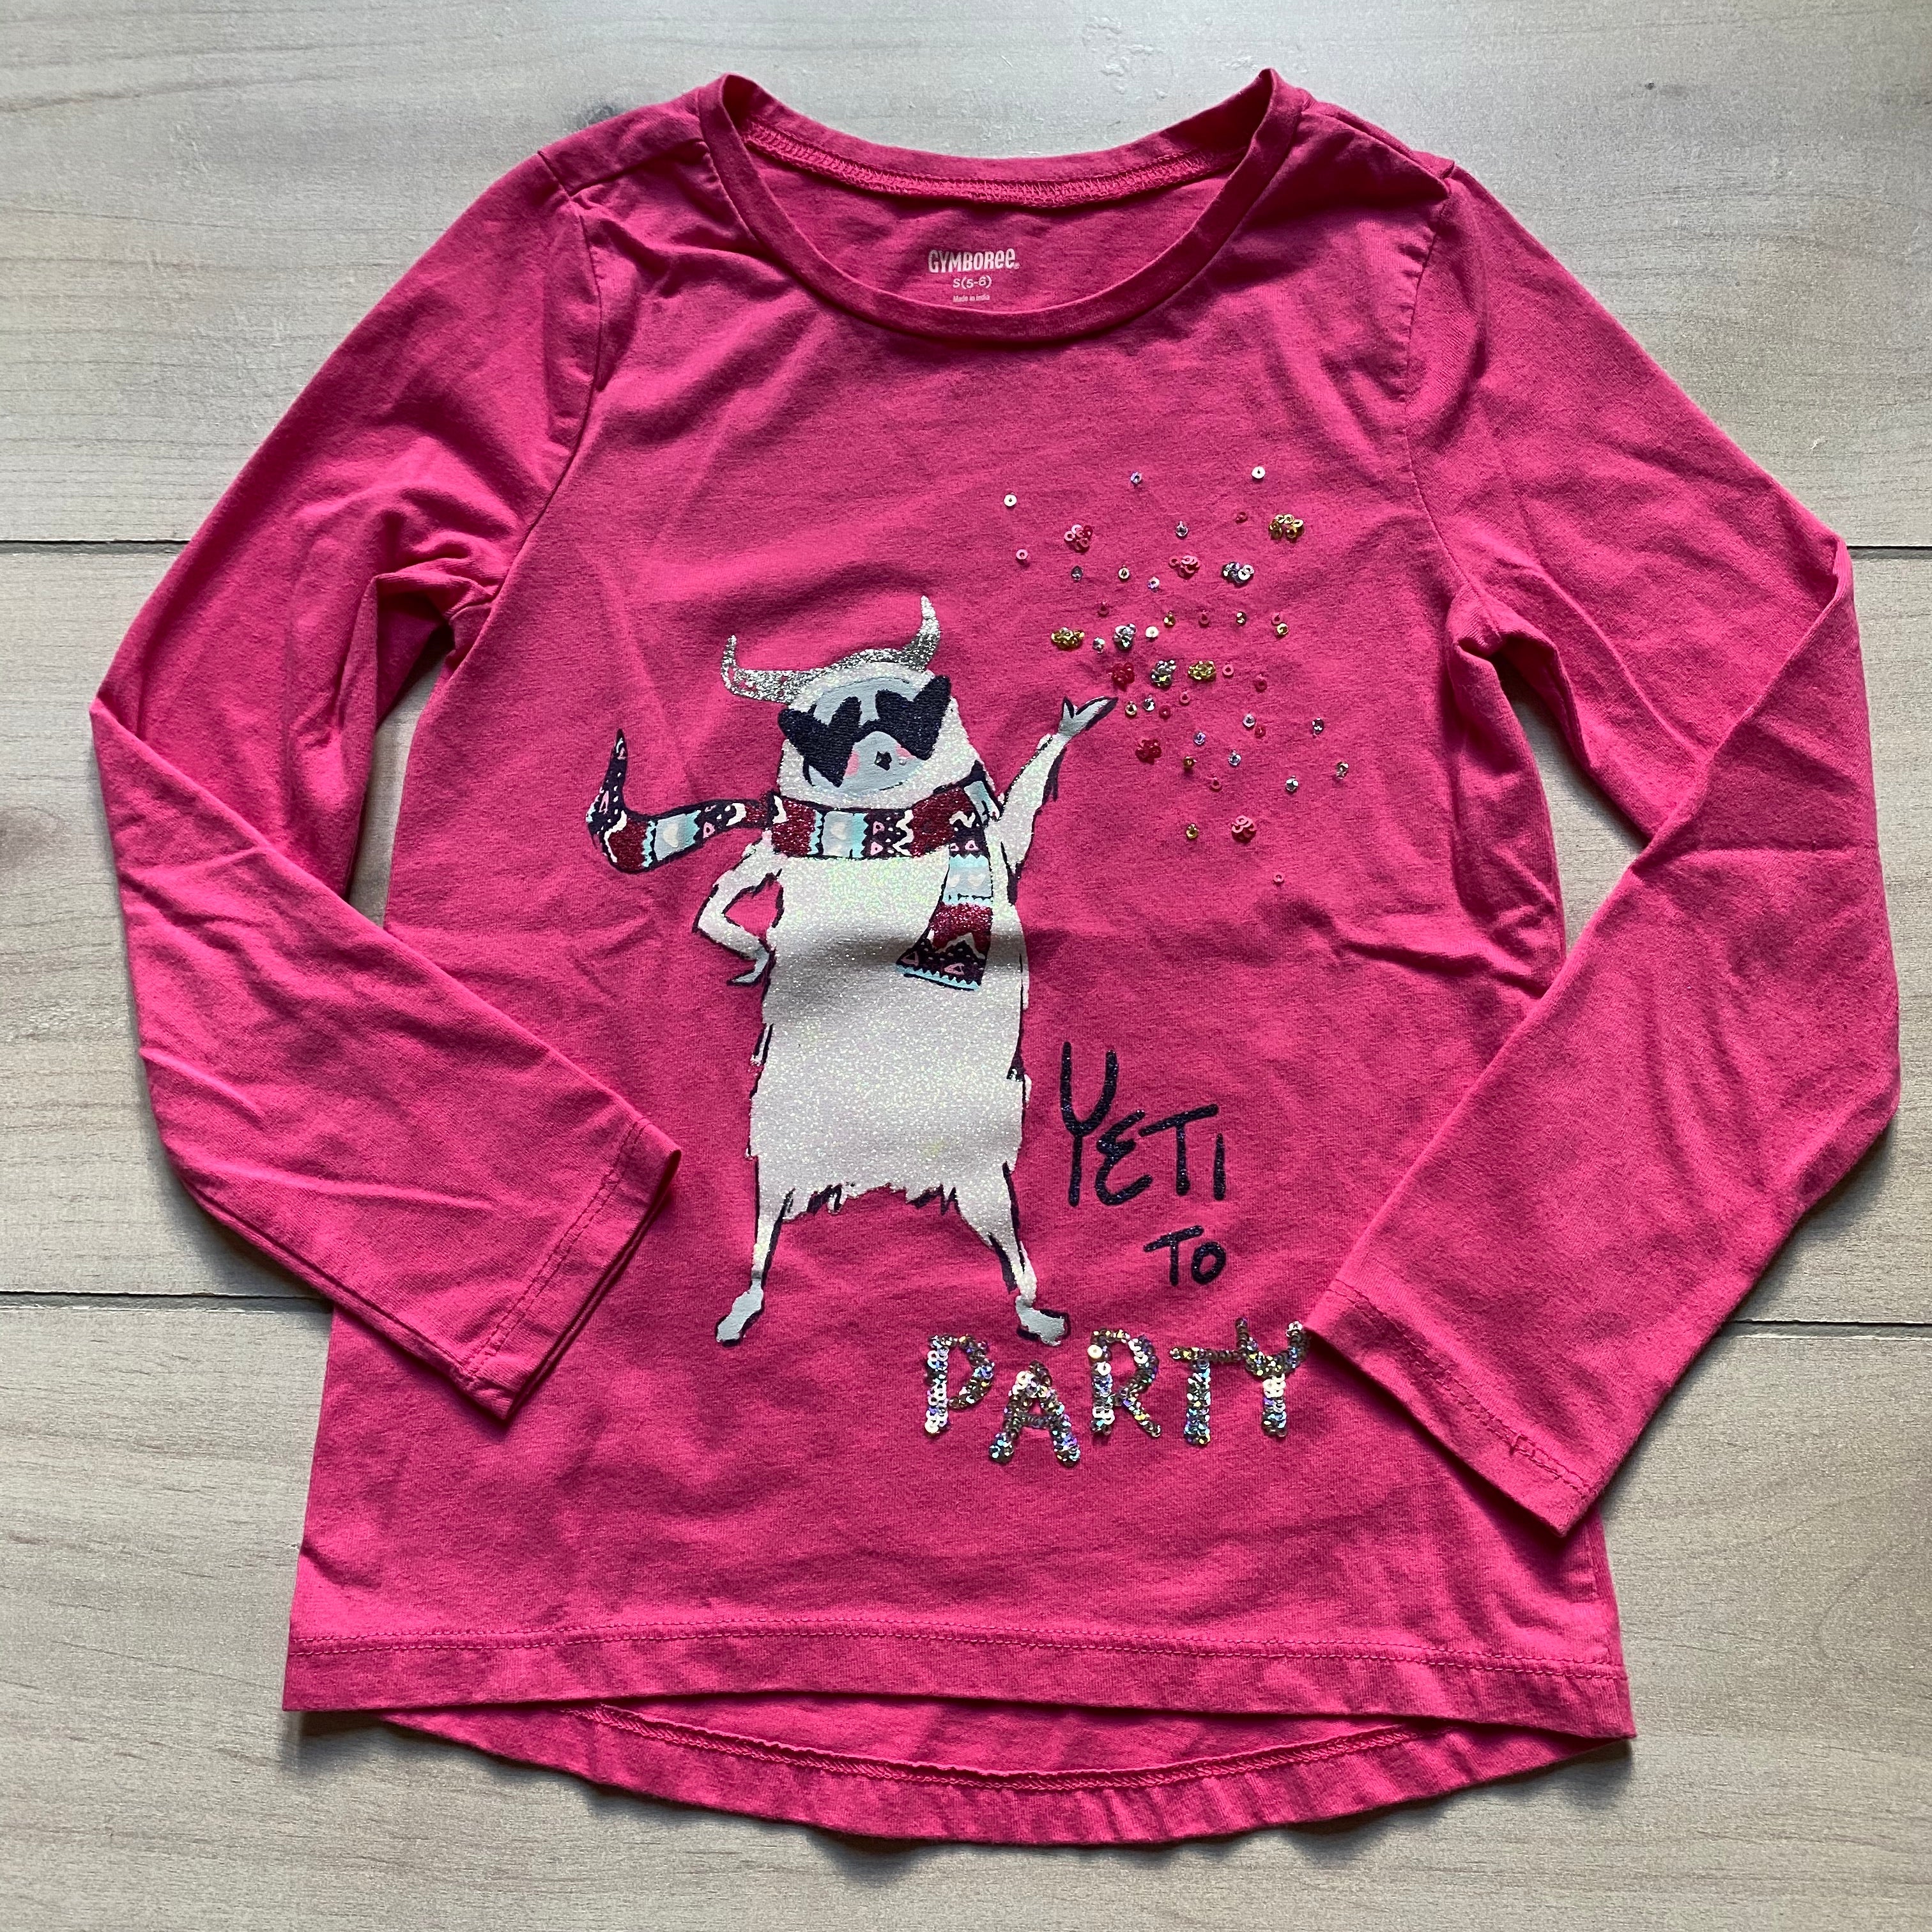 Gymboree Pink Yeti to Party Sparkle Long Sleeve Shirt – Sweet Pea & Teddy